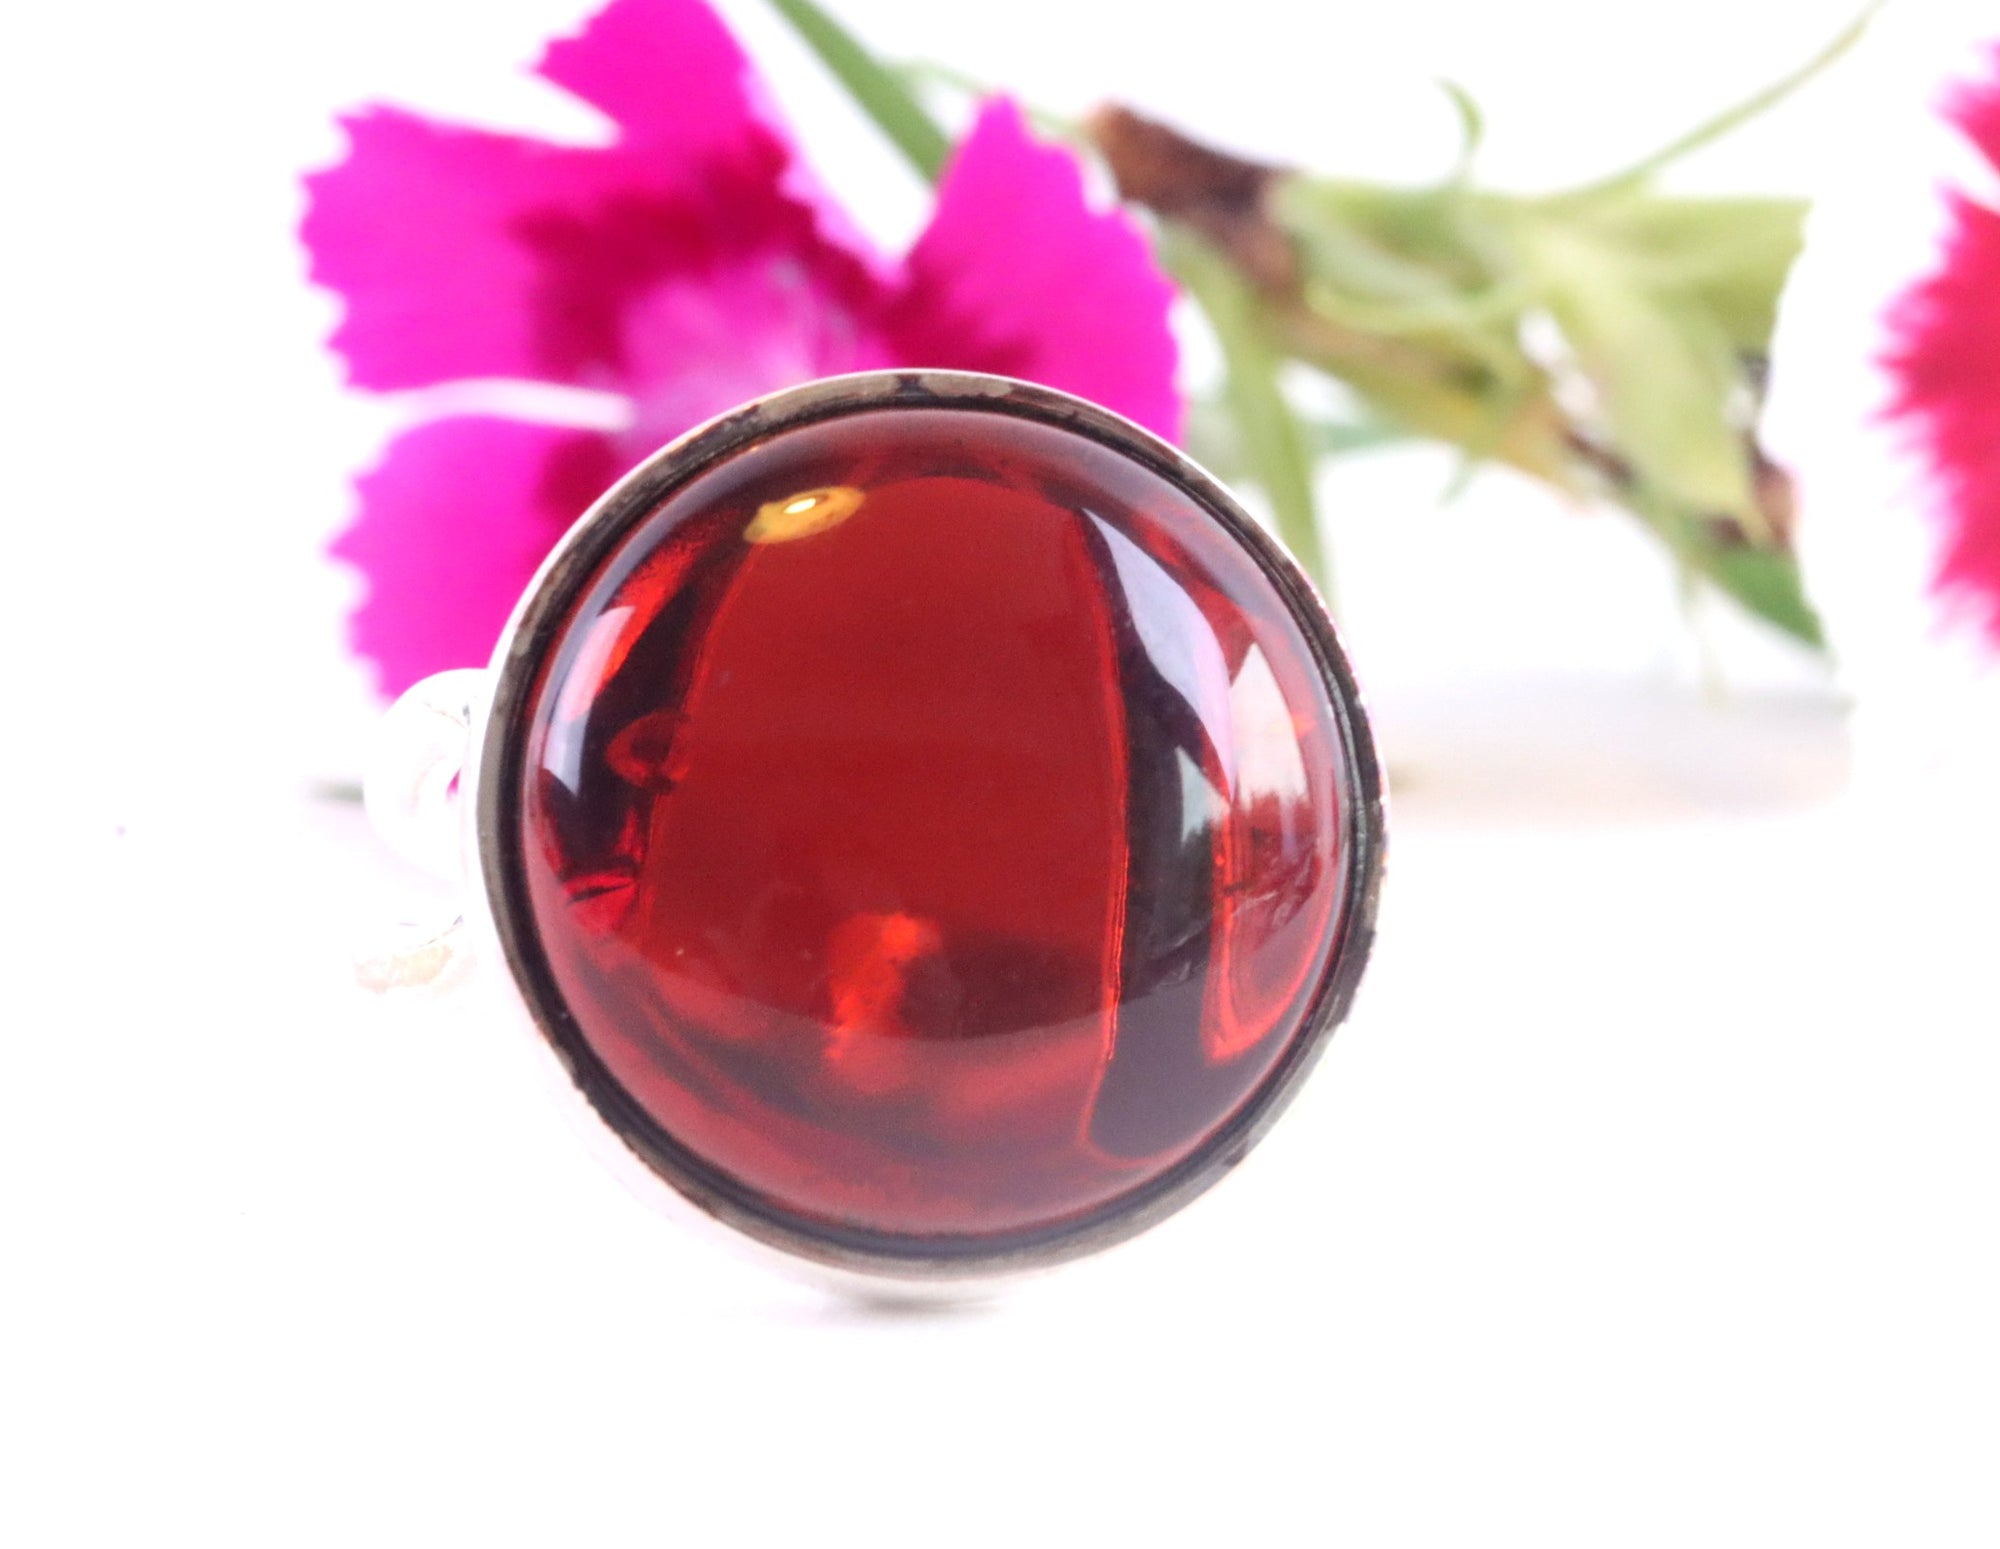 Red Baltic Amber